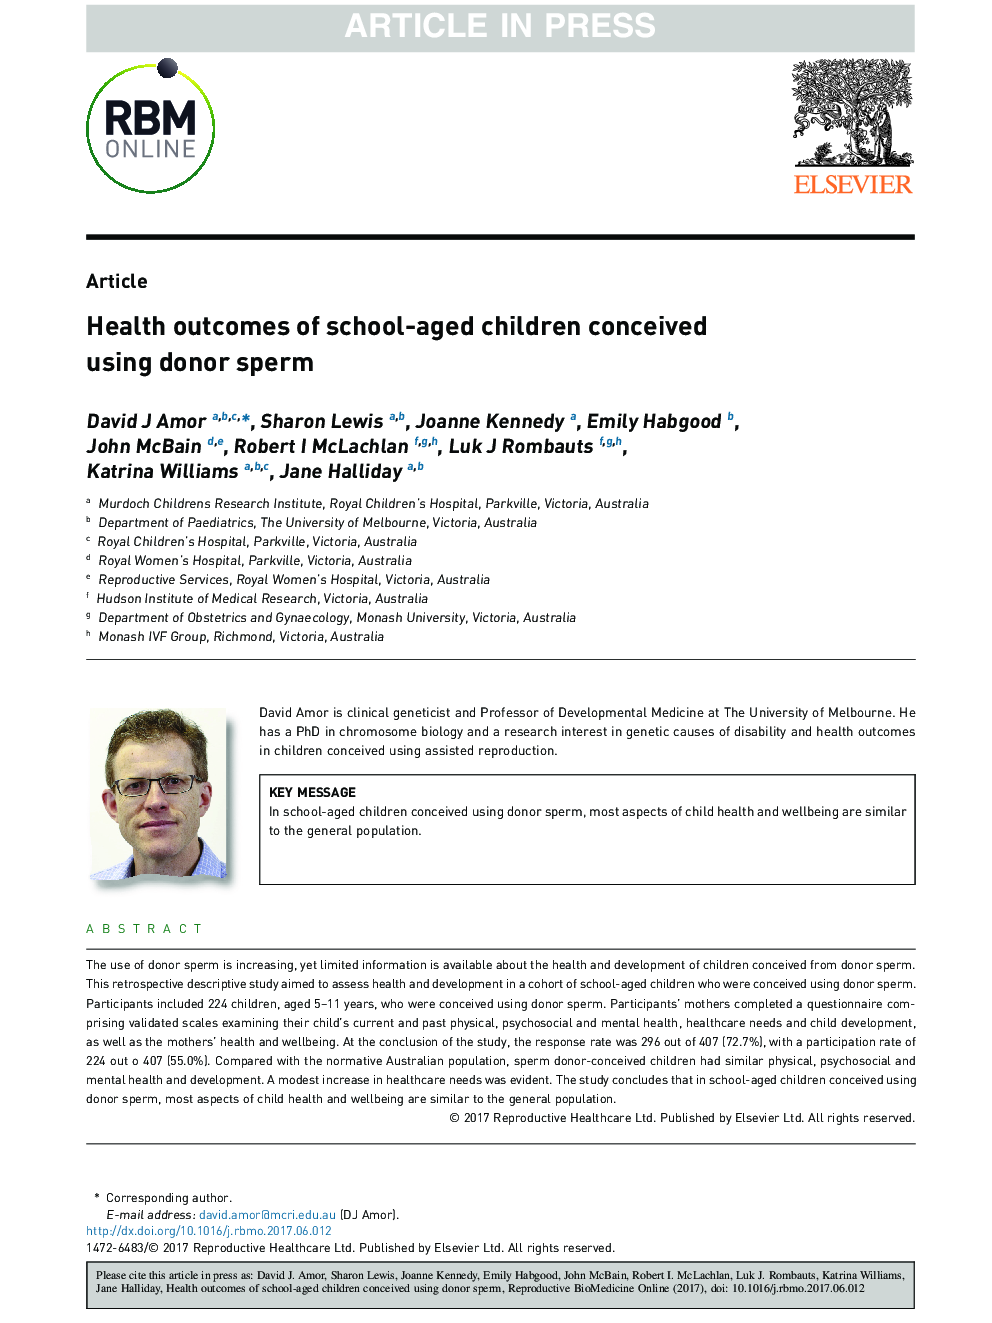 Health outcomes of school-aged children conceived using donor sperm